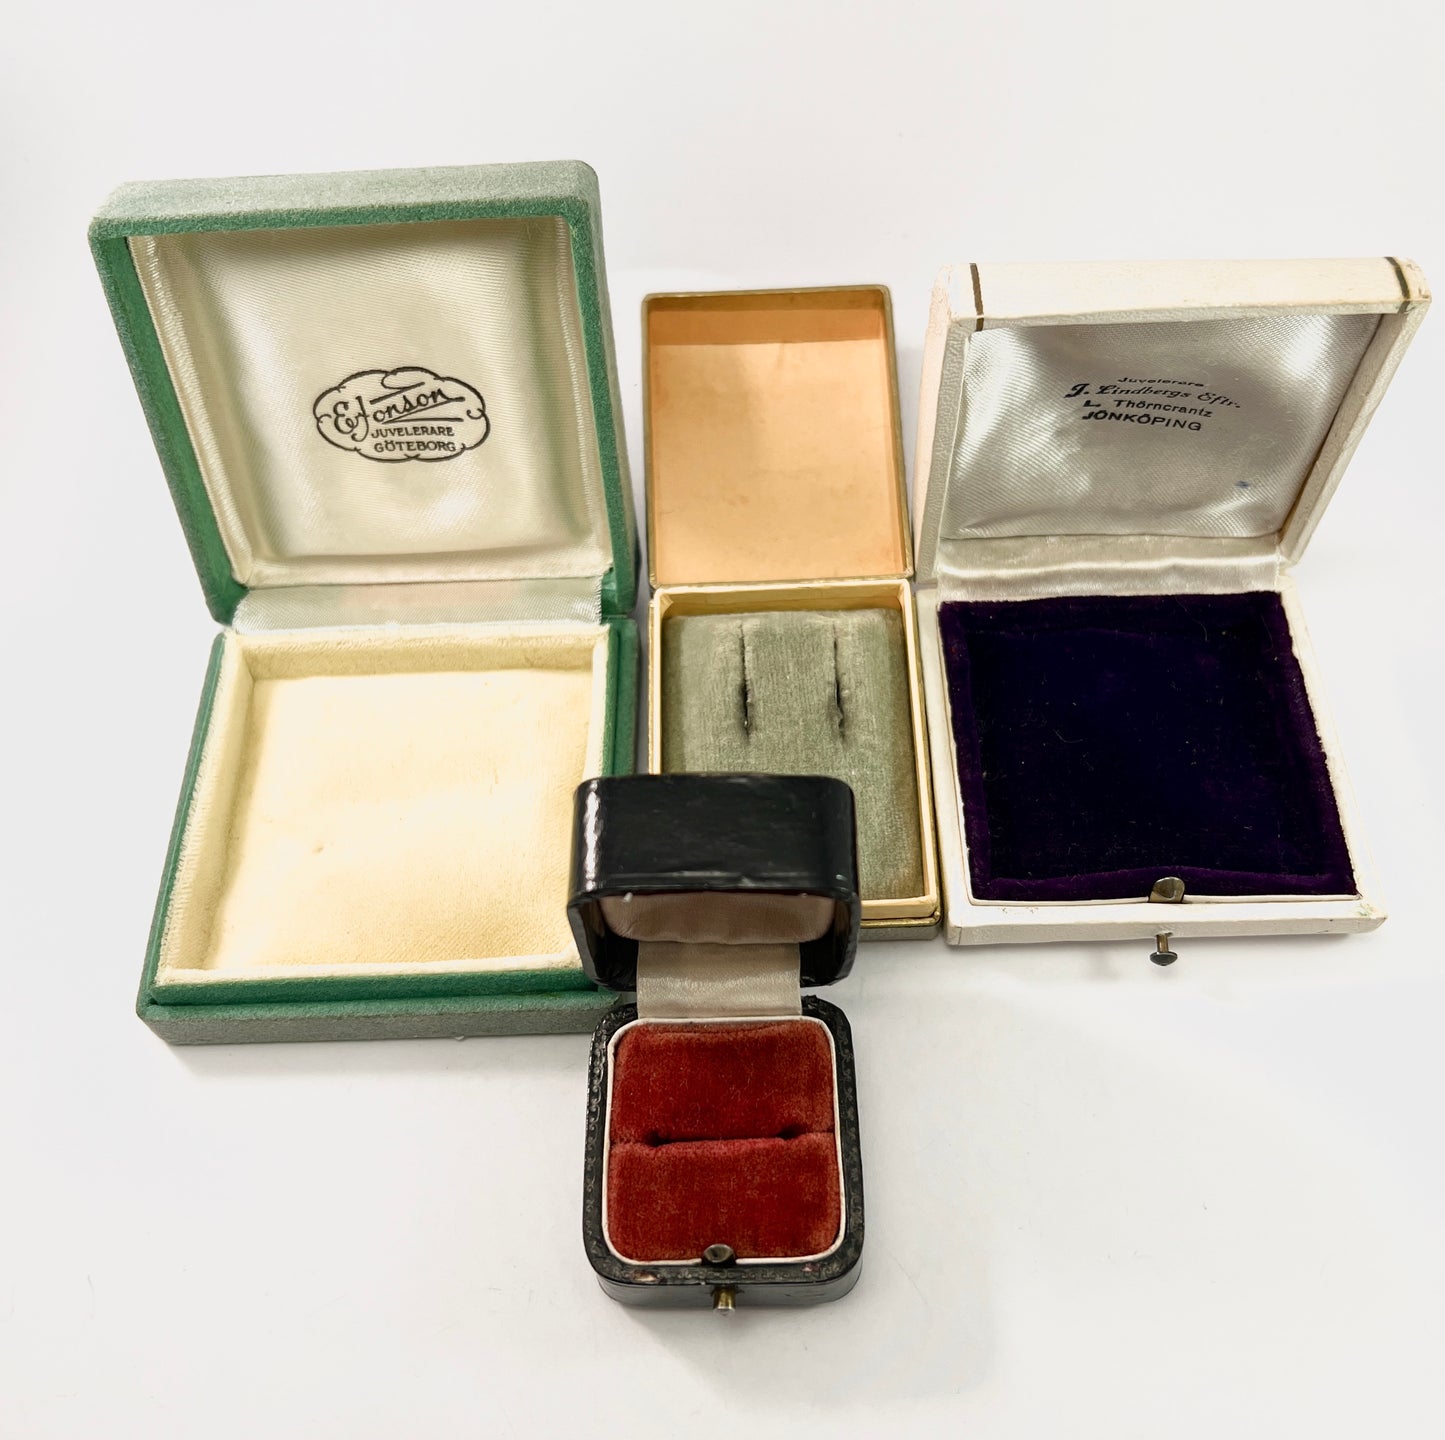 4 Vintage and Antique Jewelry Display Presentation Storage Boxes. Ring Brooch Earrings